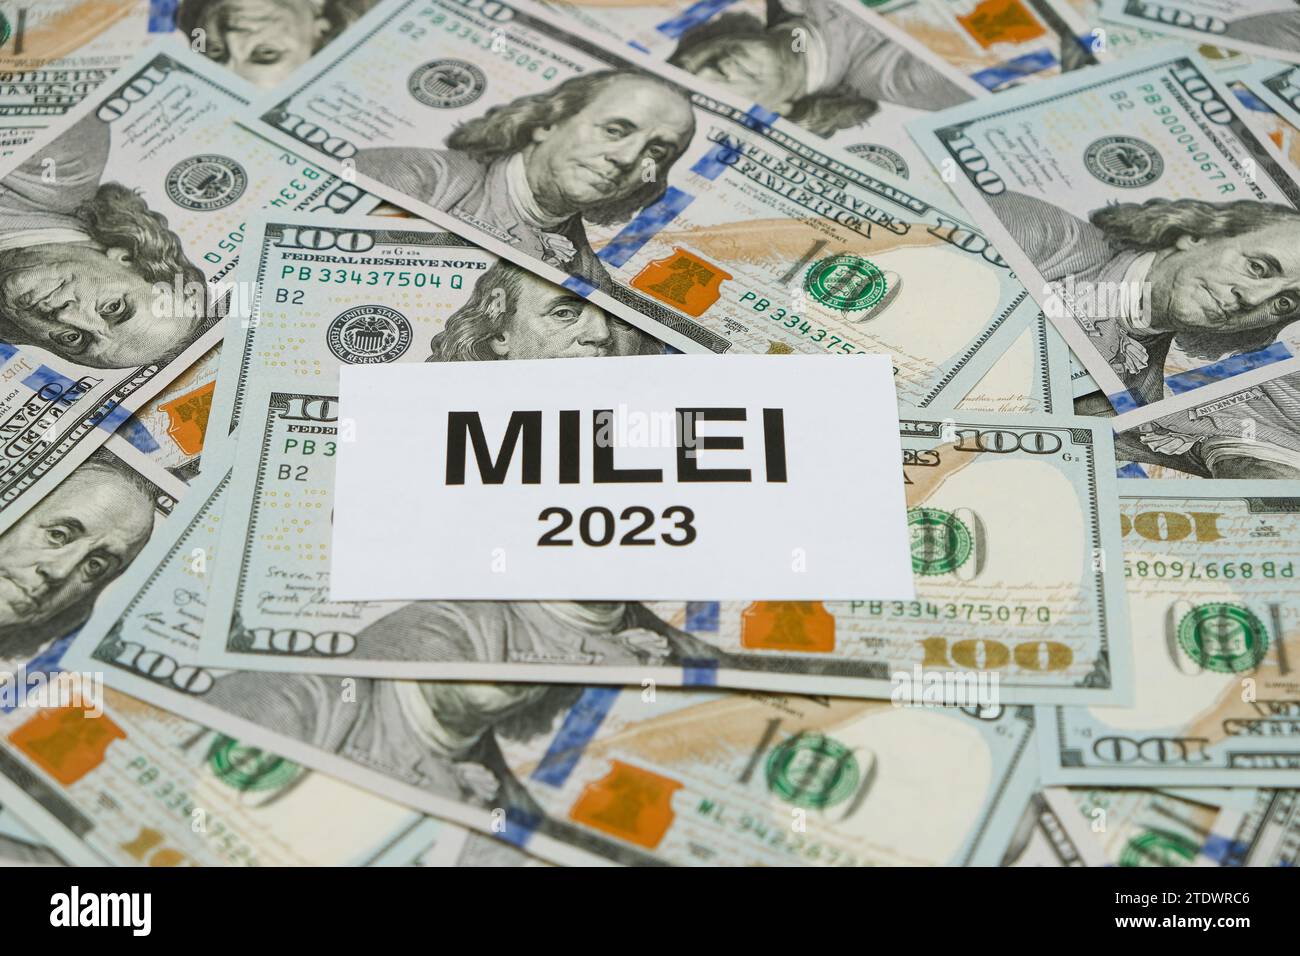 Small Paper With The Word 'Milei 2023' On A Background With Hundred Dollar Bills. Focus On The Word 'Milei' Stock Photo